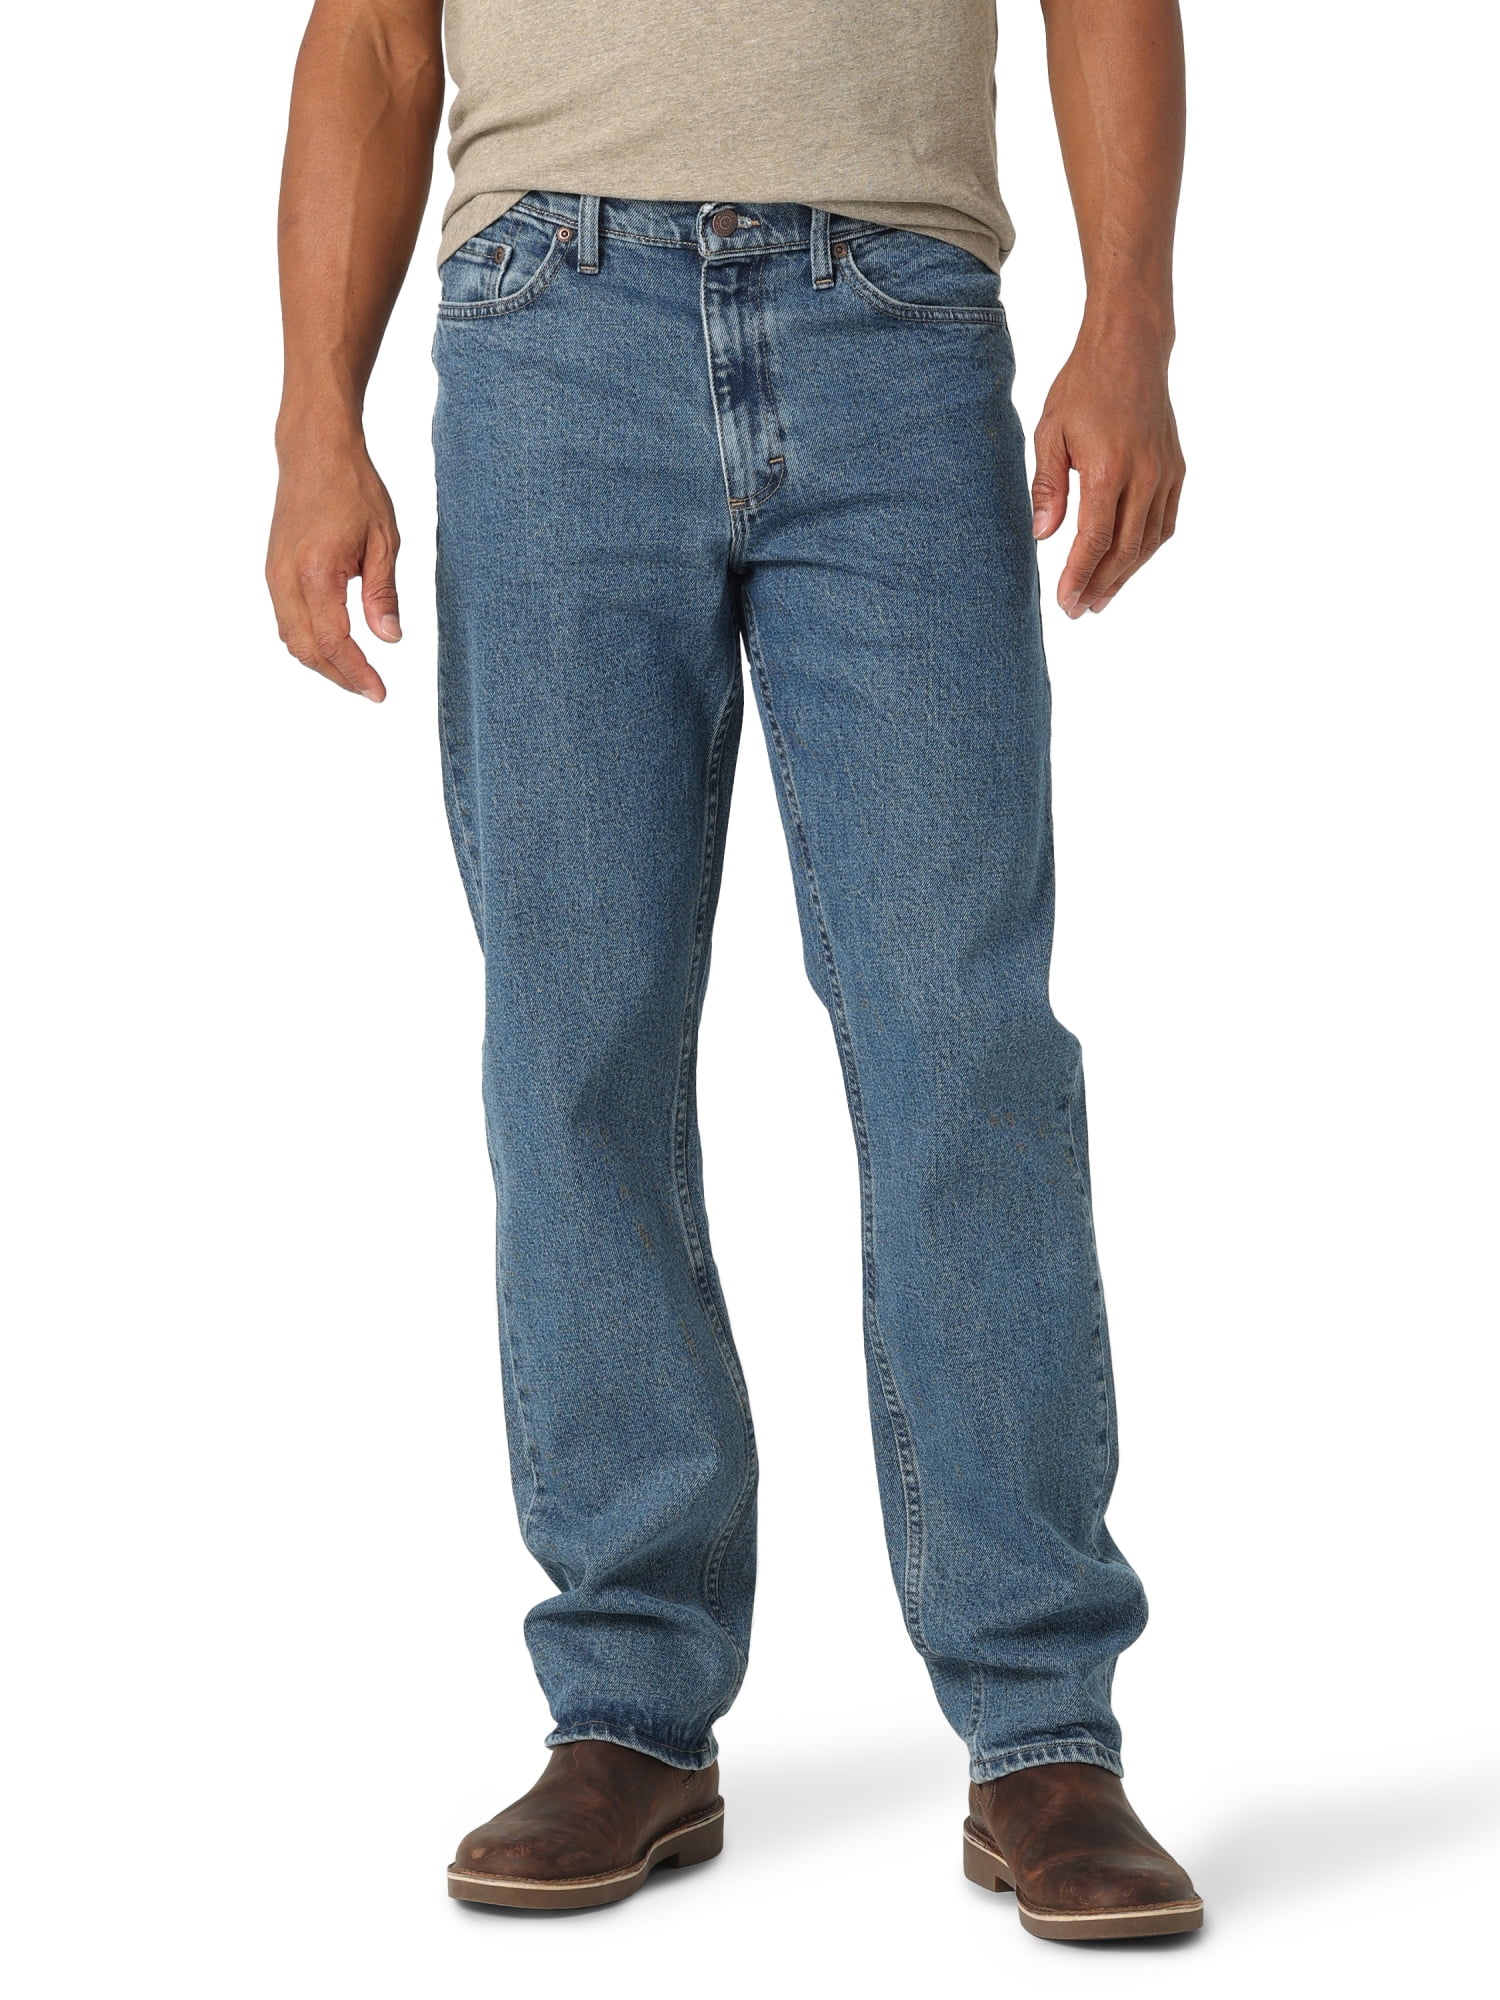 Men's and Men's Relaxed Fit with Flex - Walmart.com